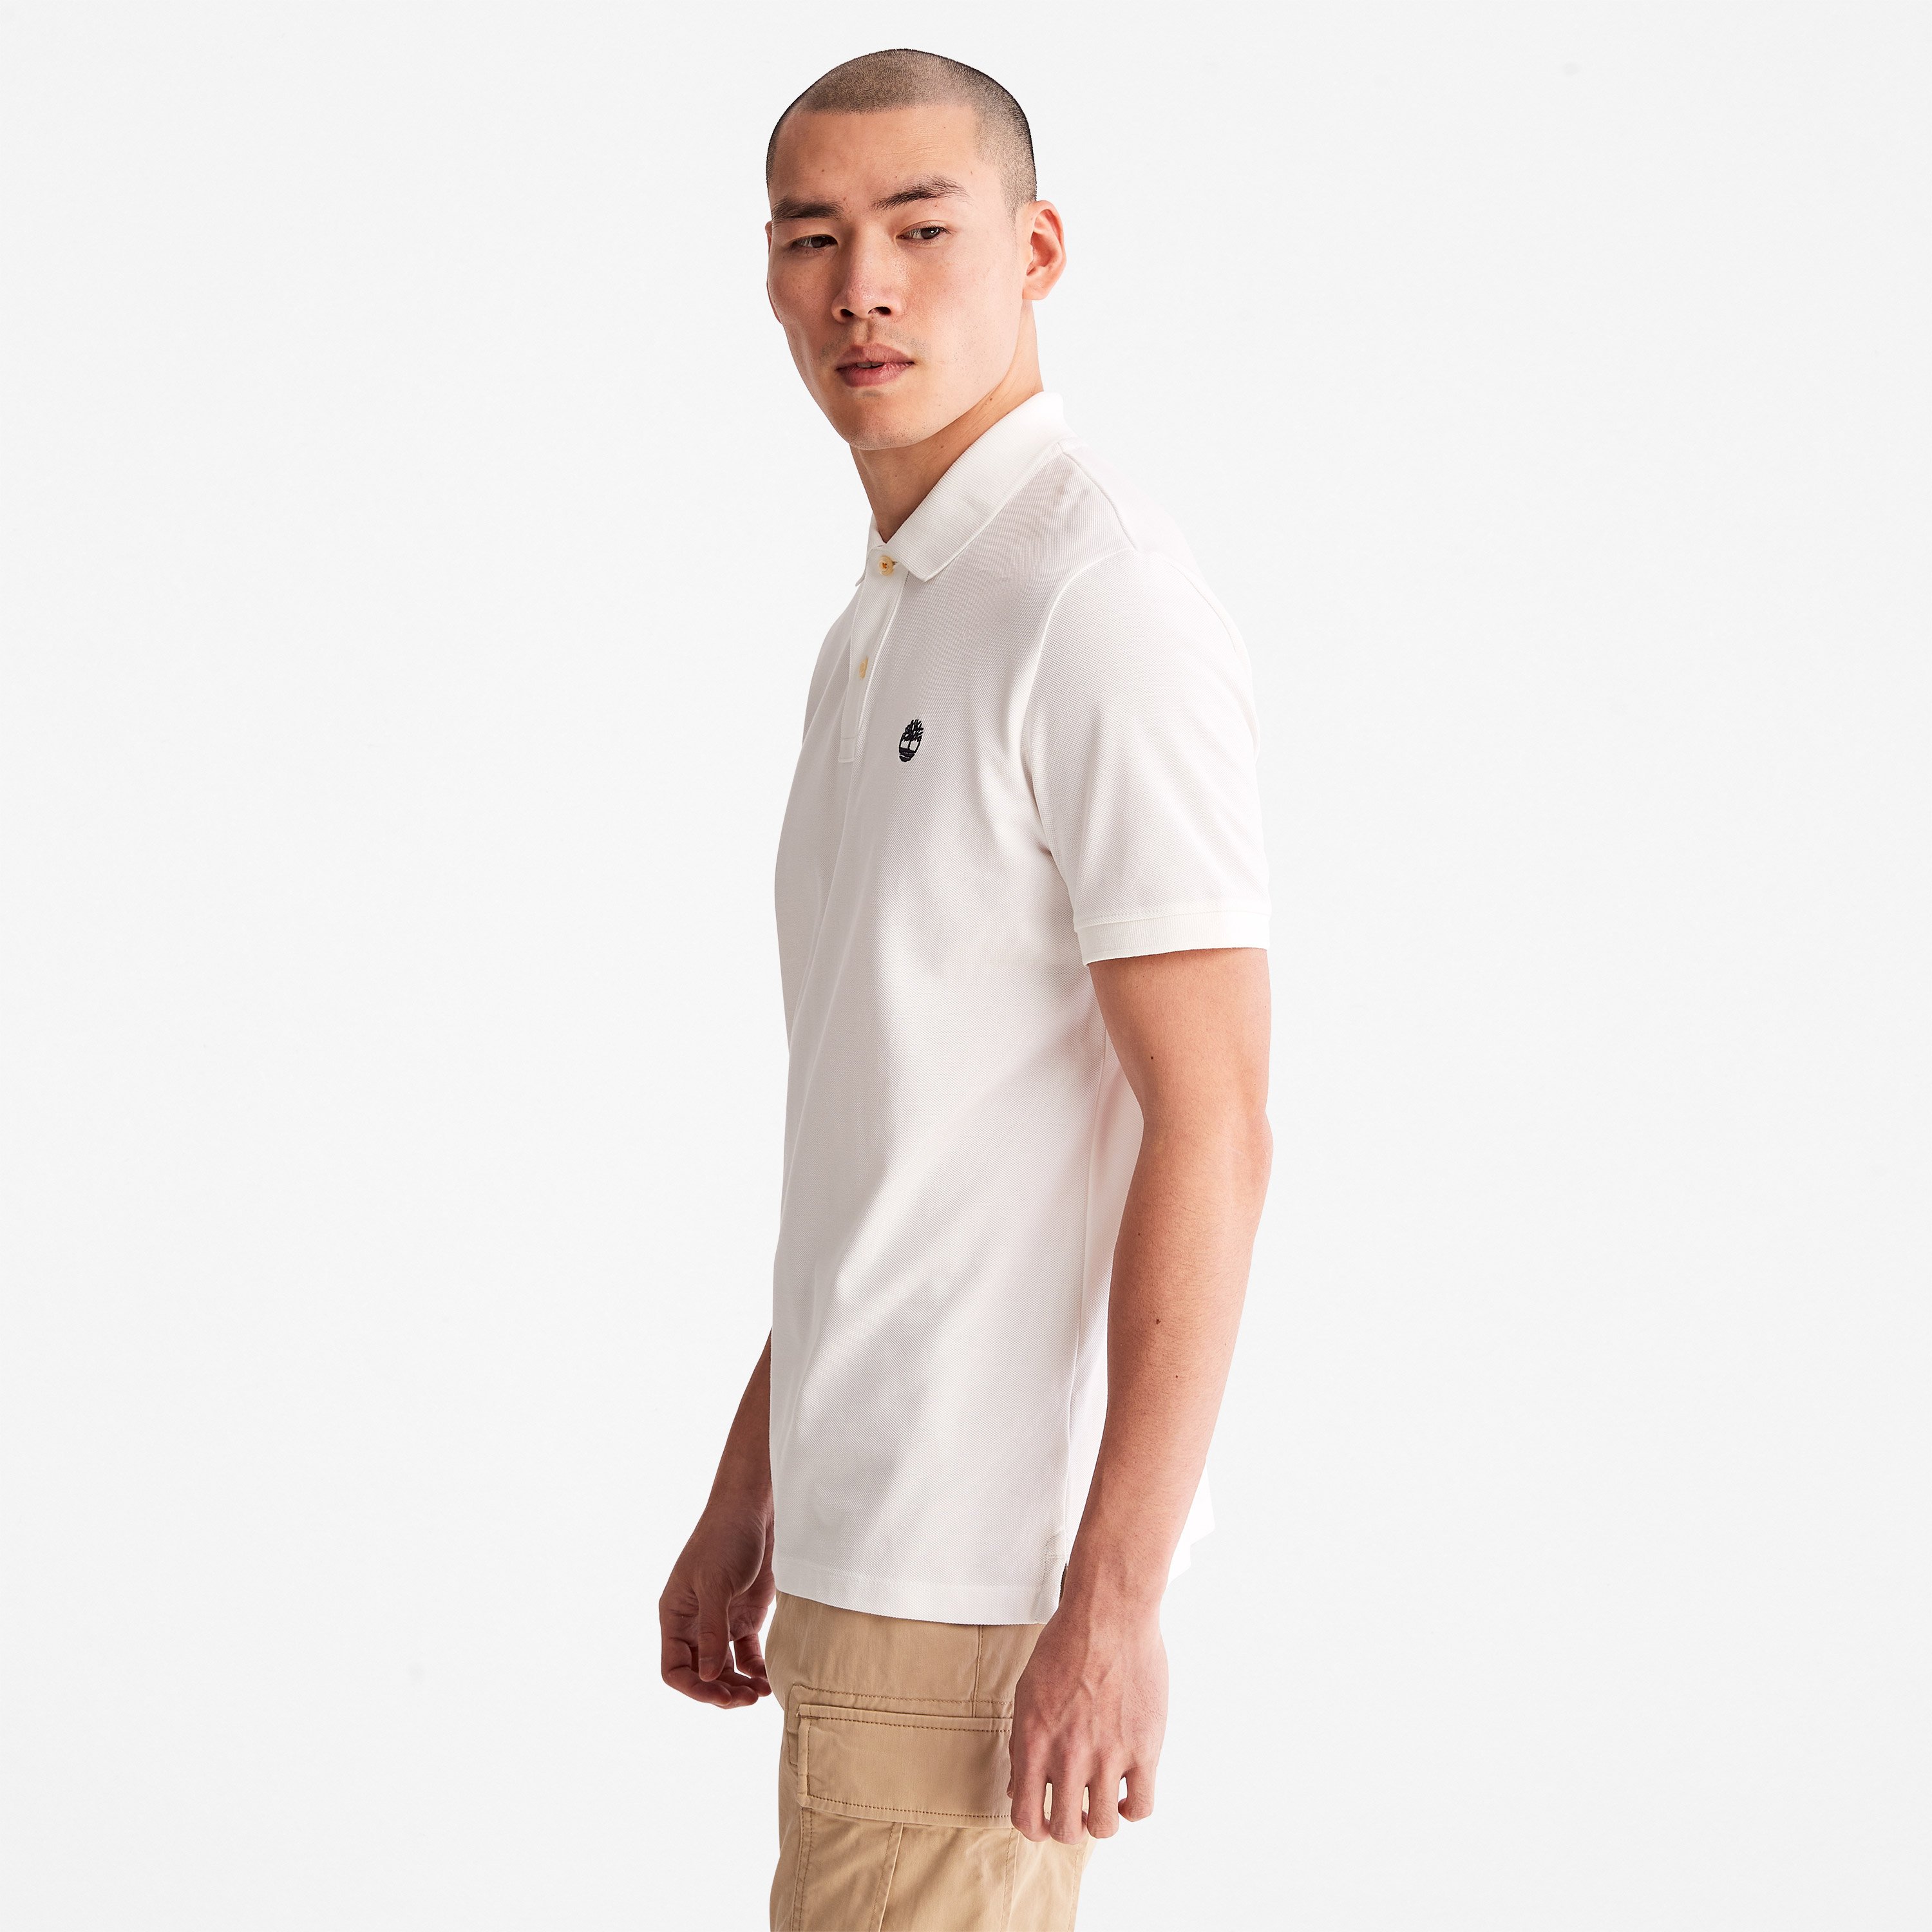 Men's Millers River Pique Polo Shirt - Timberland - Singapore